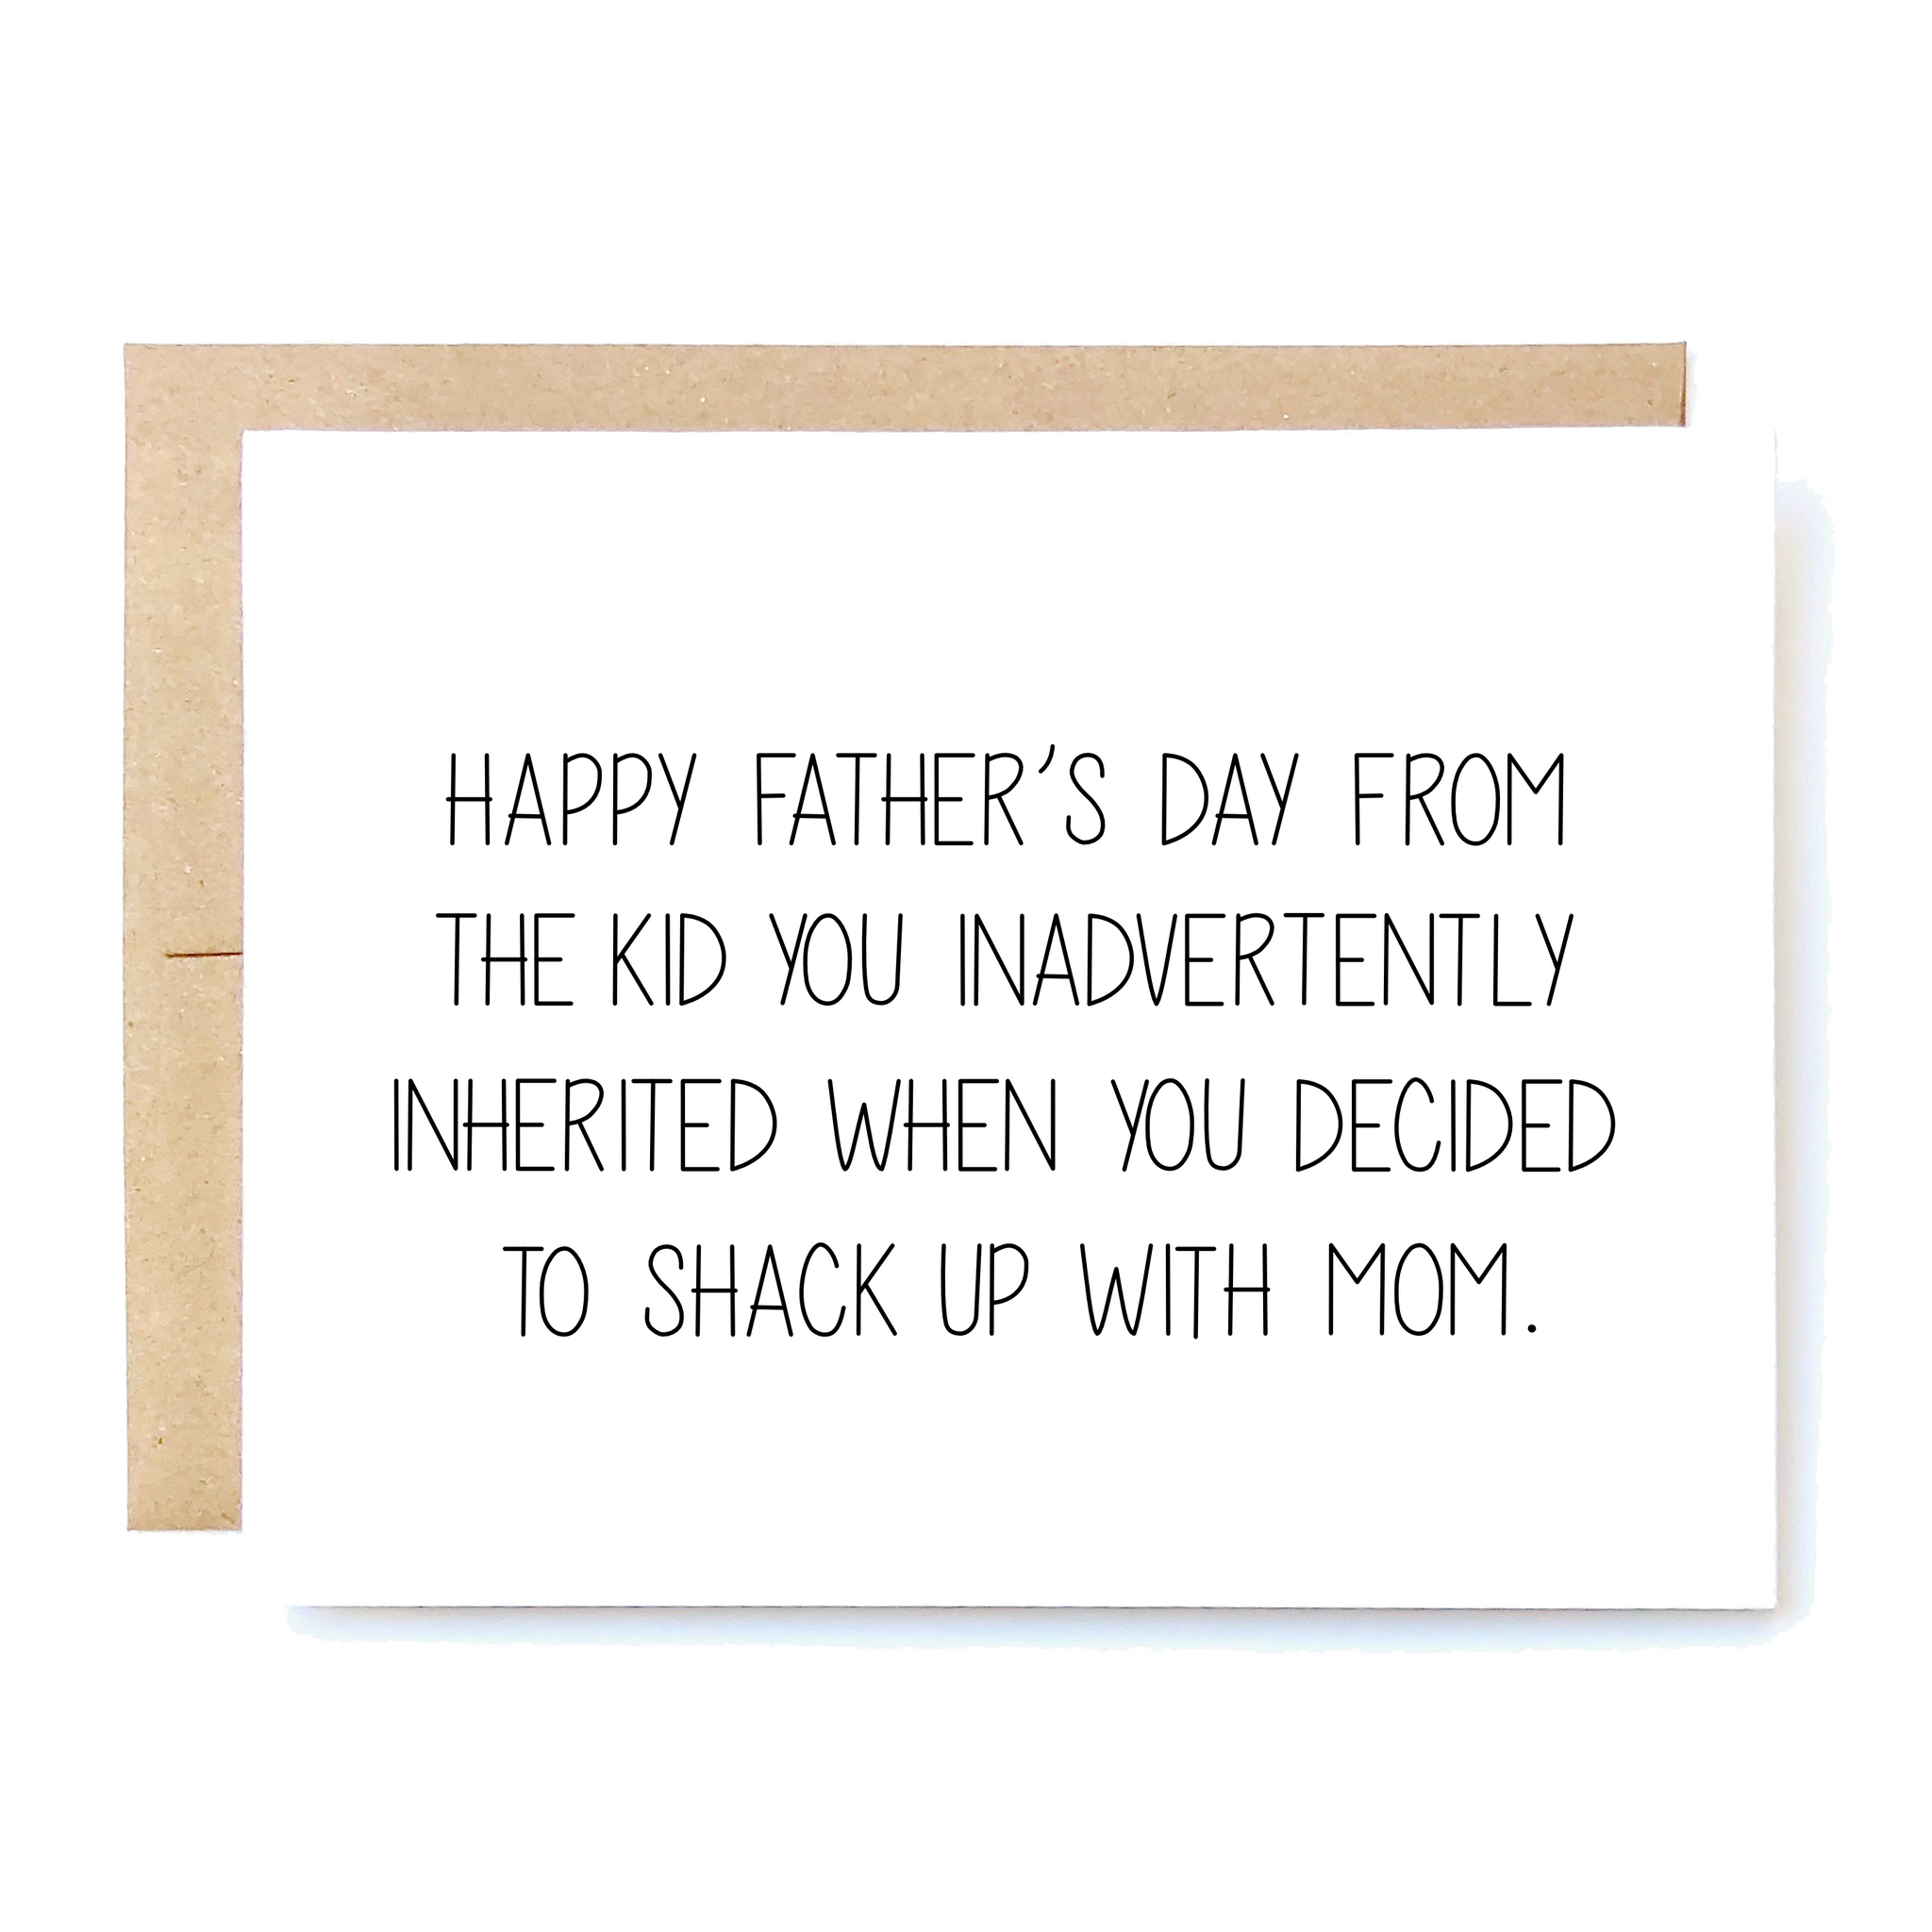 Card Front: Happy Father's Day from the kid you inadvertently inherited when you decided to shack up with mom.